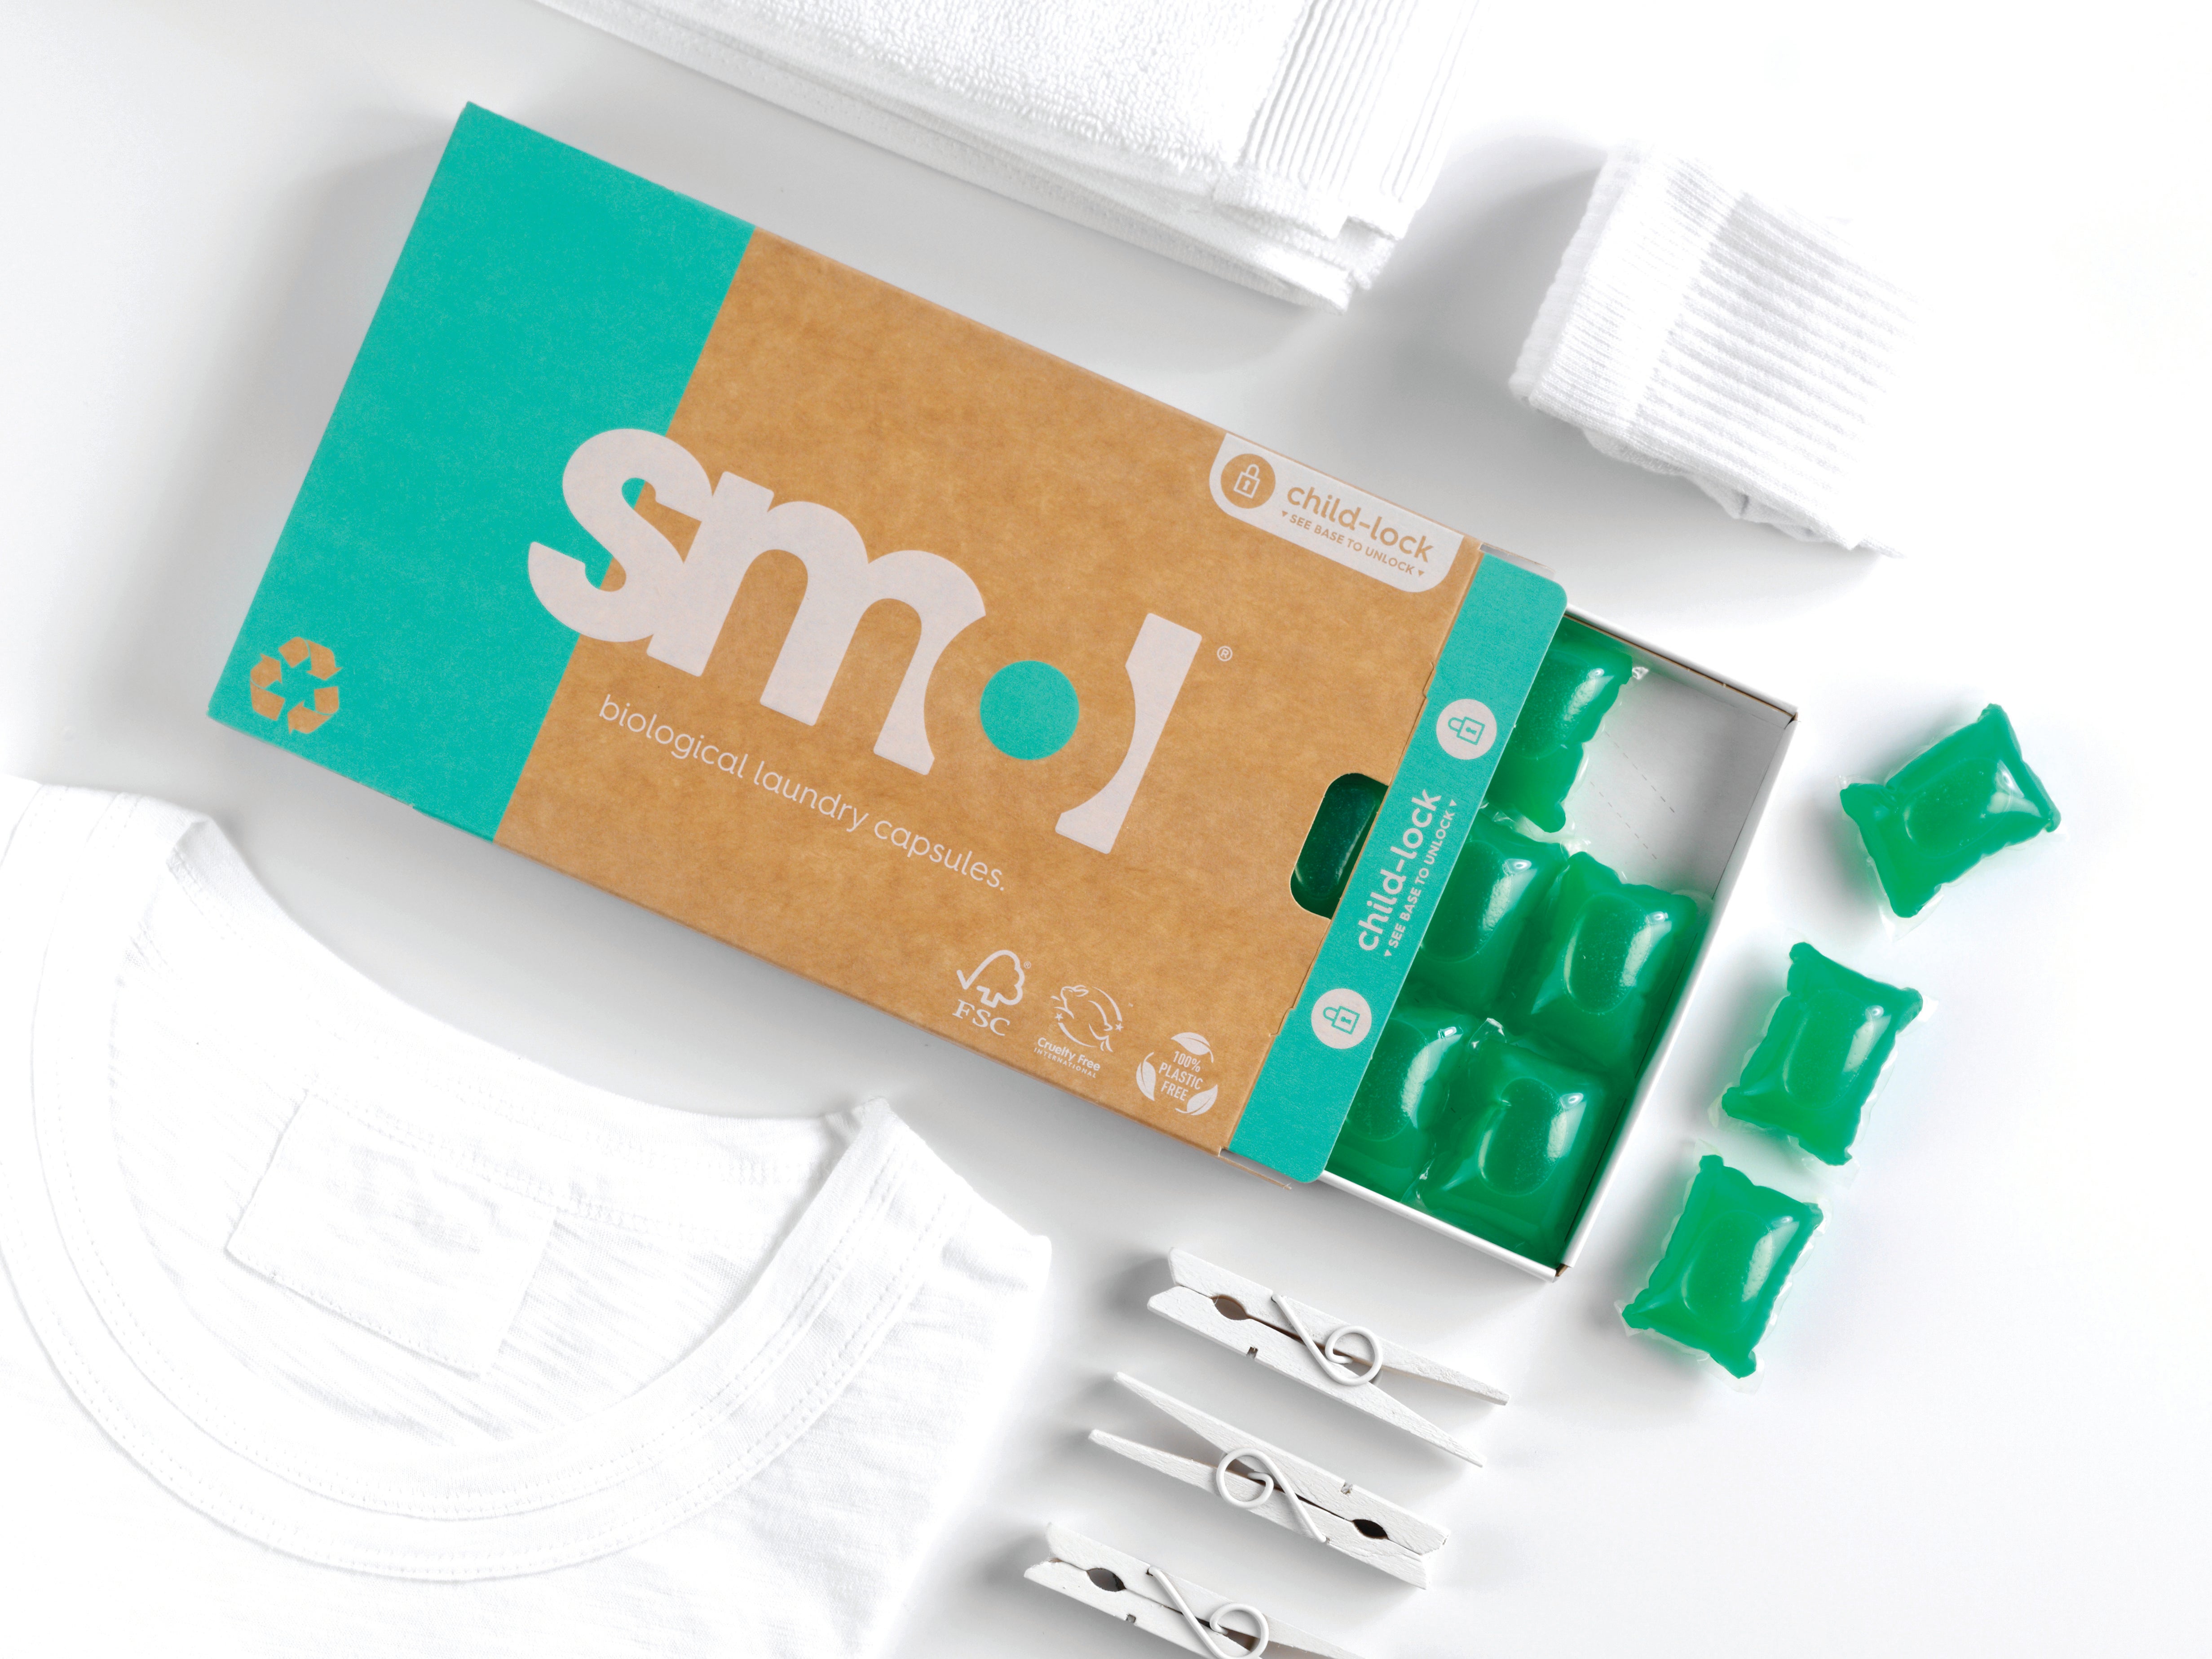 Smol laundry capsules review Do the eco-friendly tablets work? The Independent